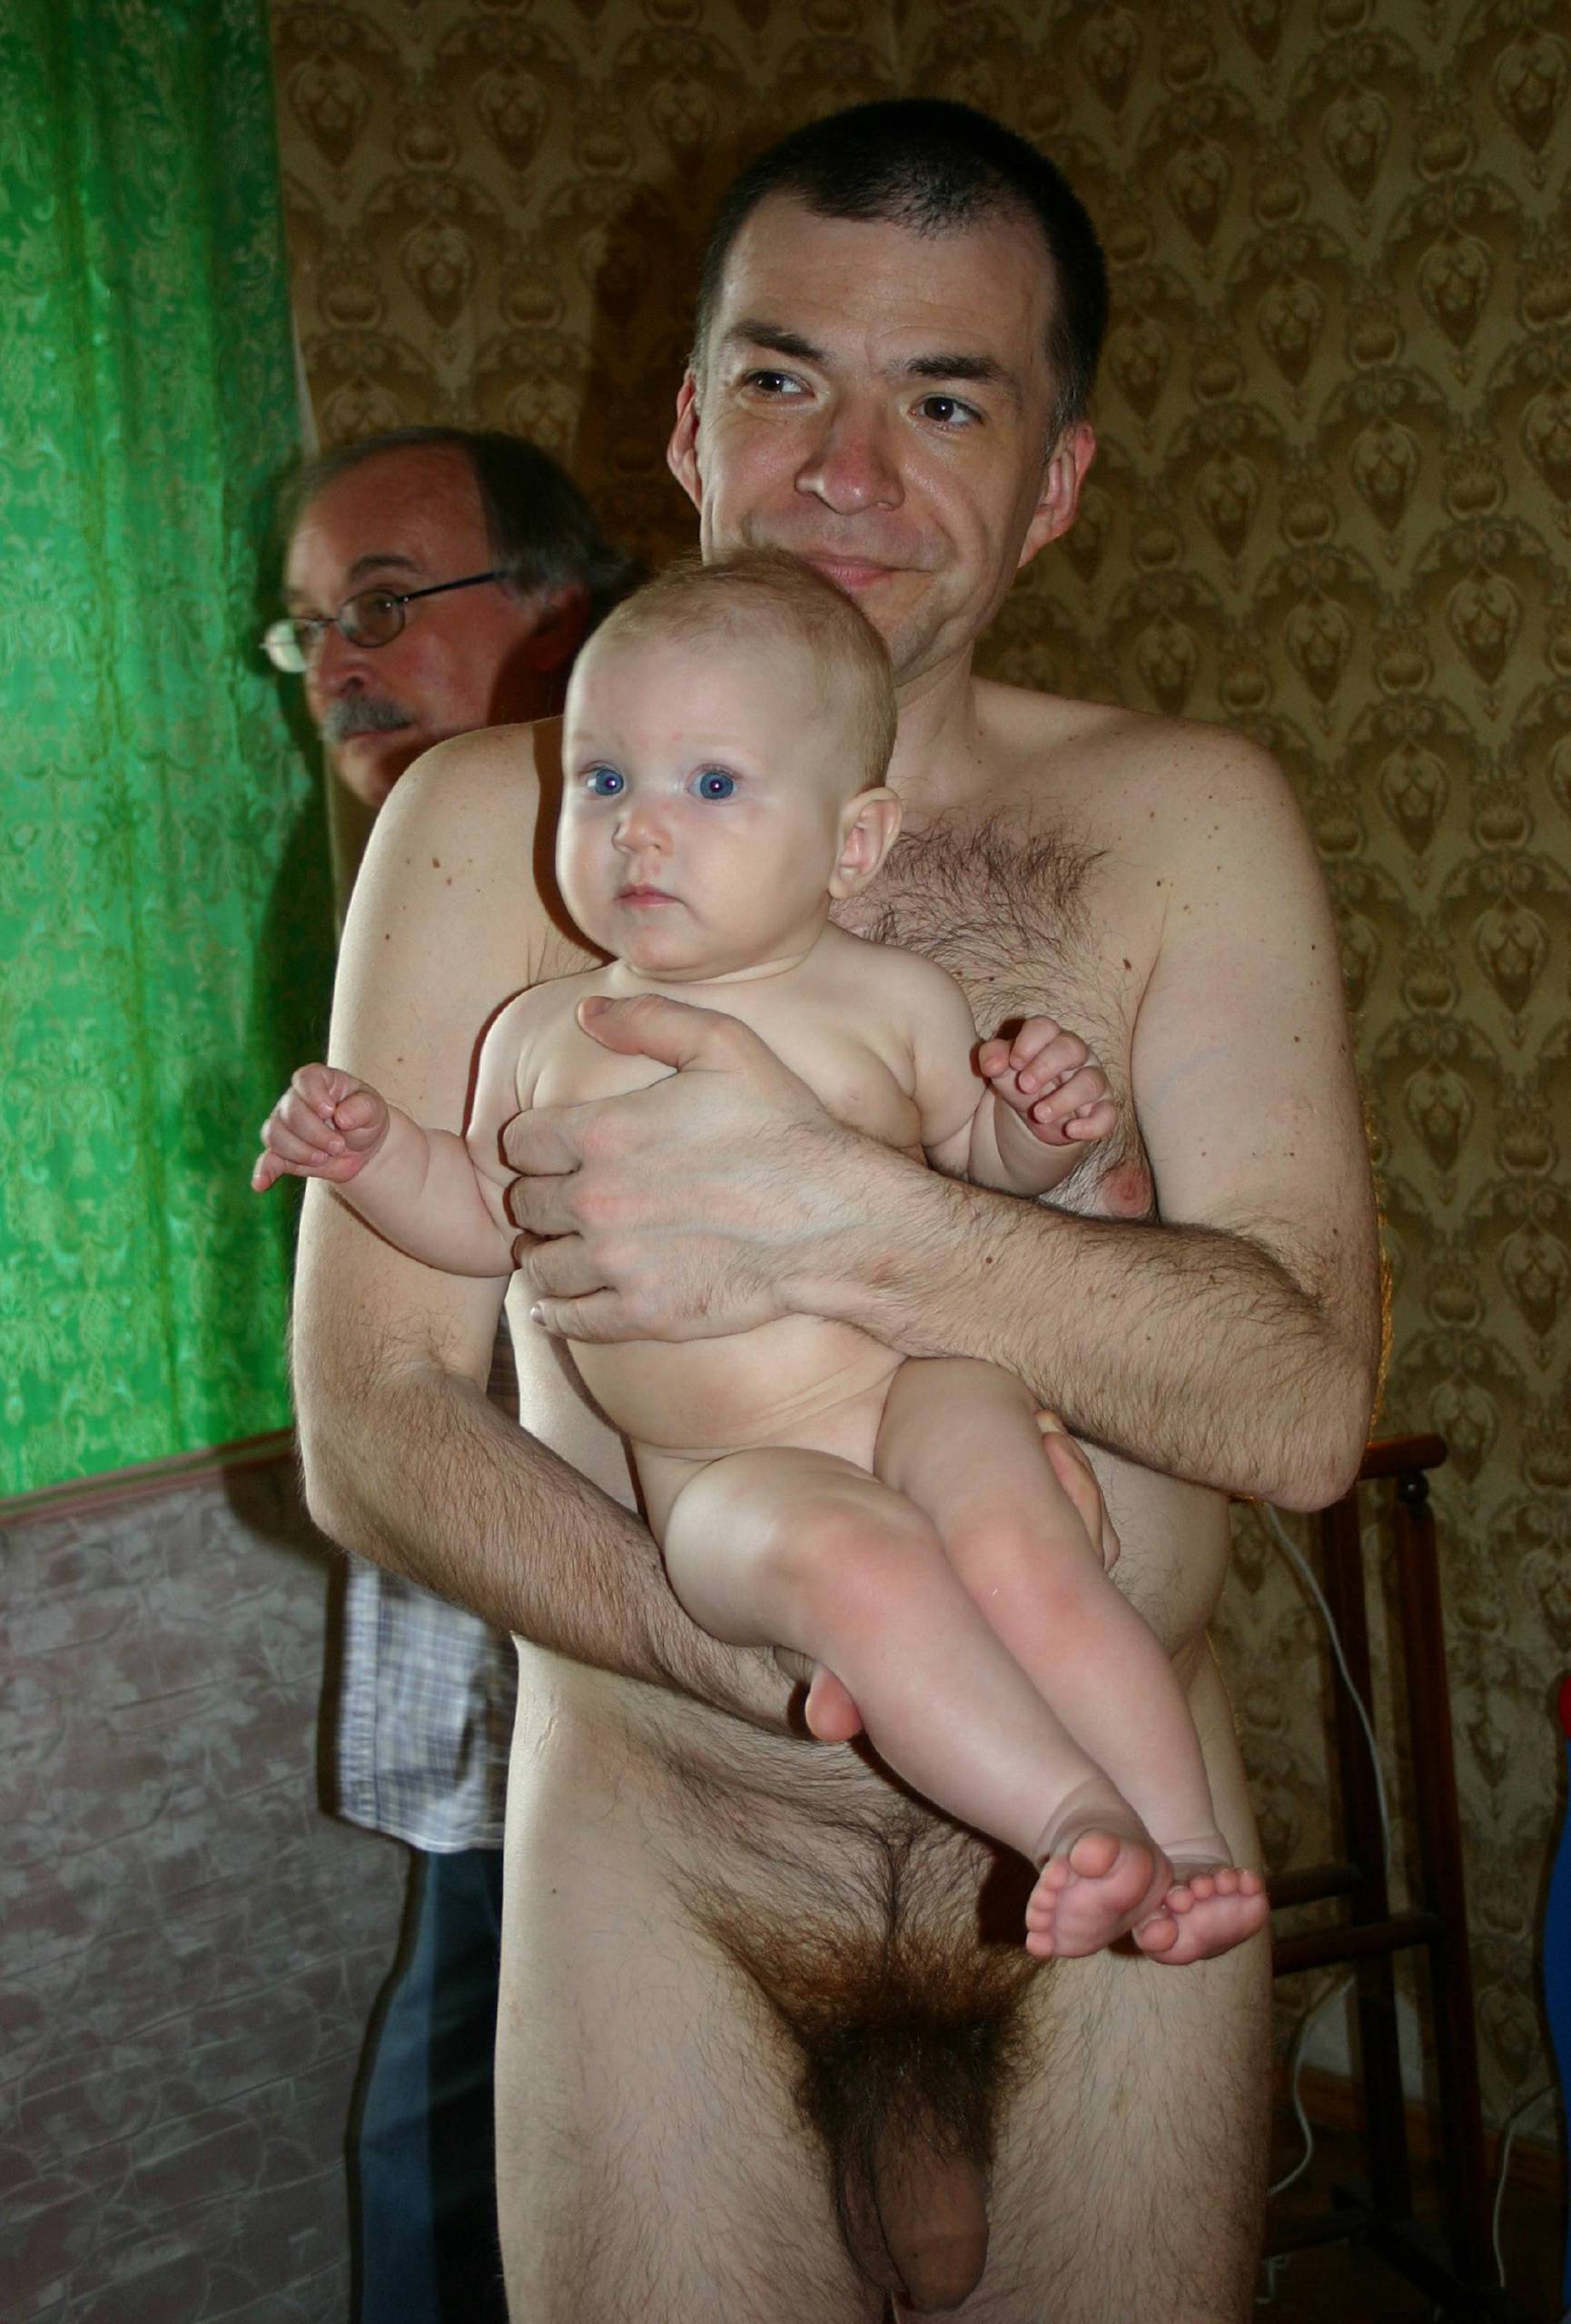 Nudist Photos Baby and Families Profiles - 2